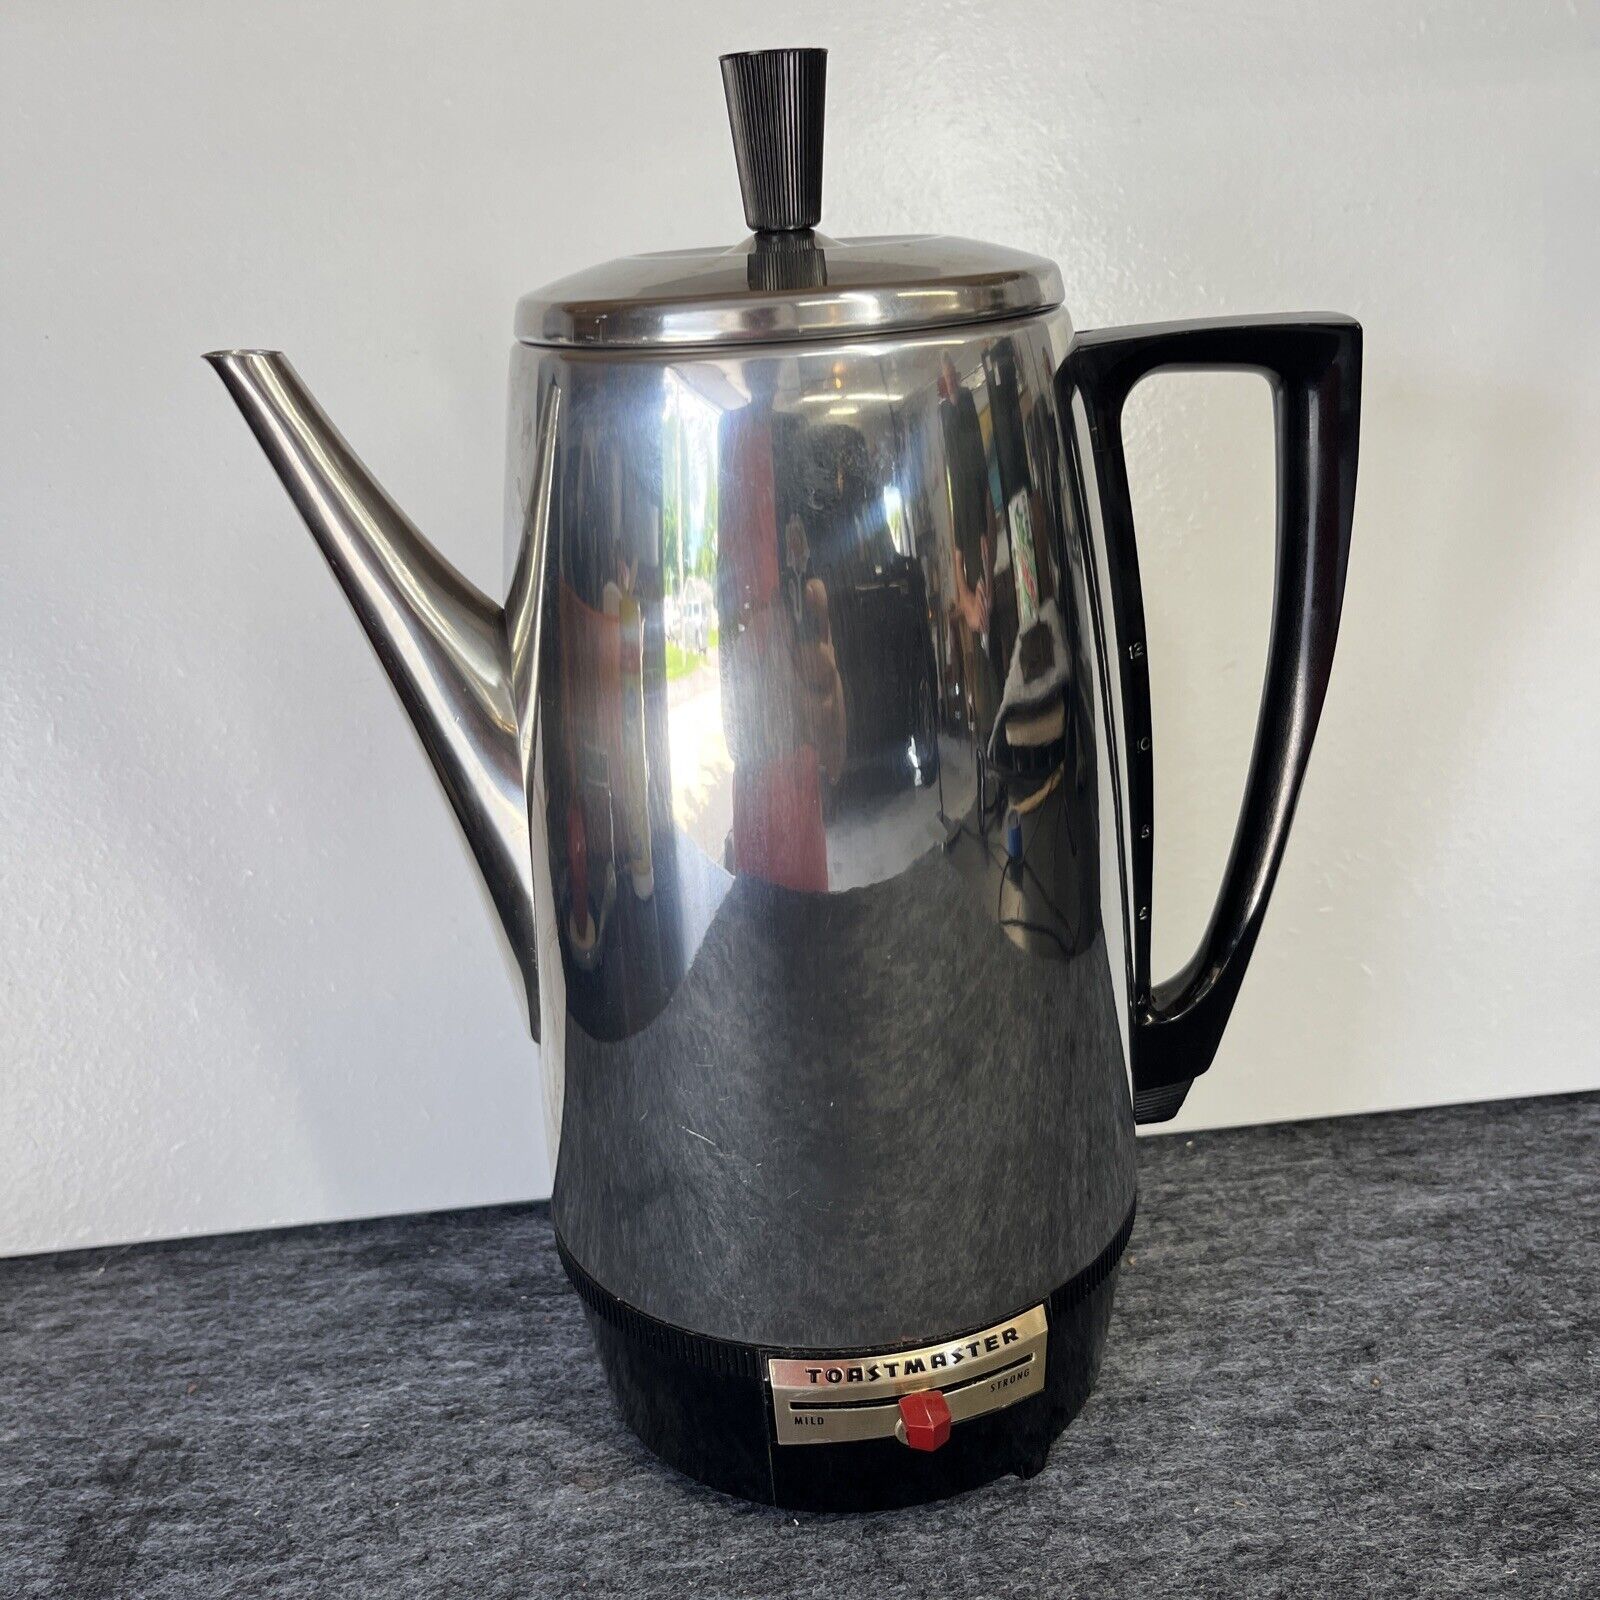 Vintage Toastmaster Percolating Coffee Pot, Stainless Steel, M521, 12 Cup, Works